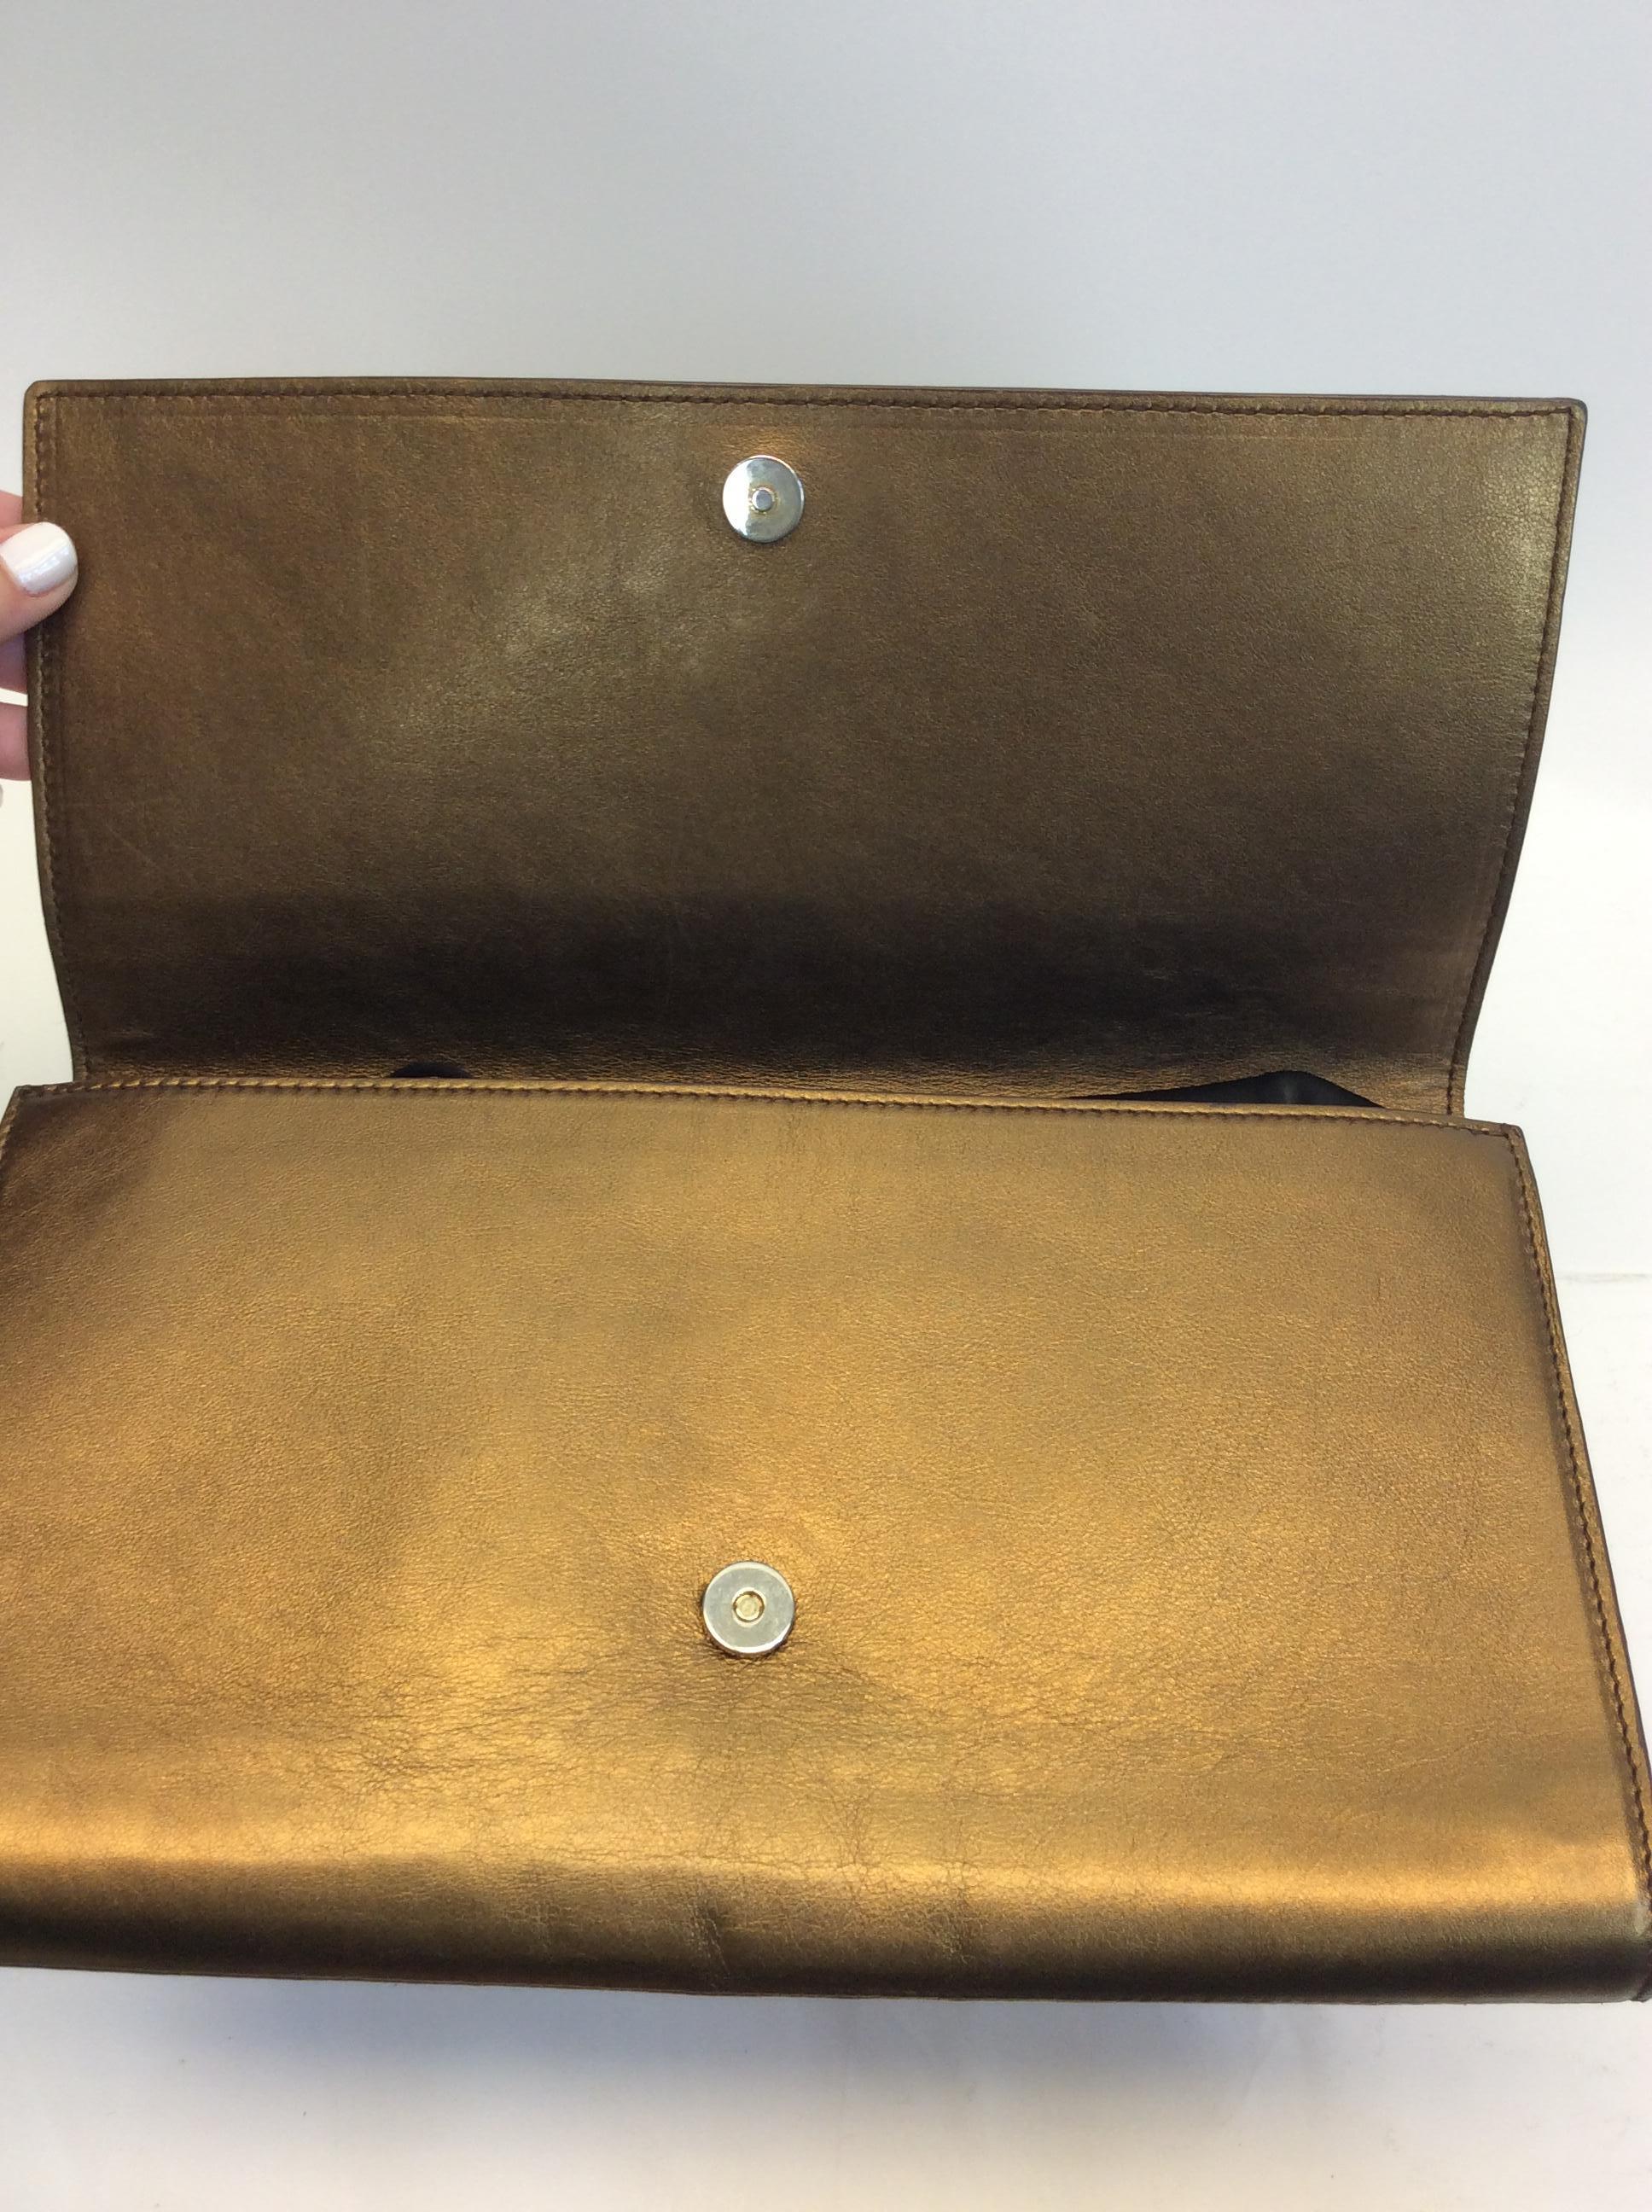 Yves Saint Laurent Bronze Metallic Leather 'Sac De Jour' Clutch In Good Condition For Sale In Narberth, PA